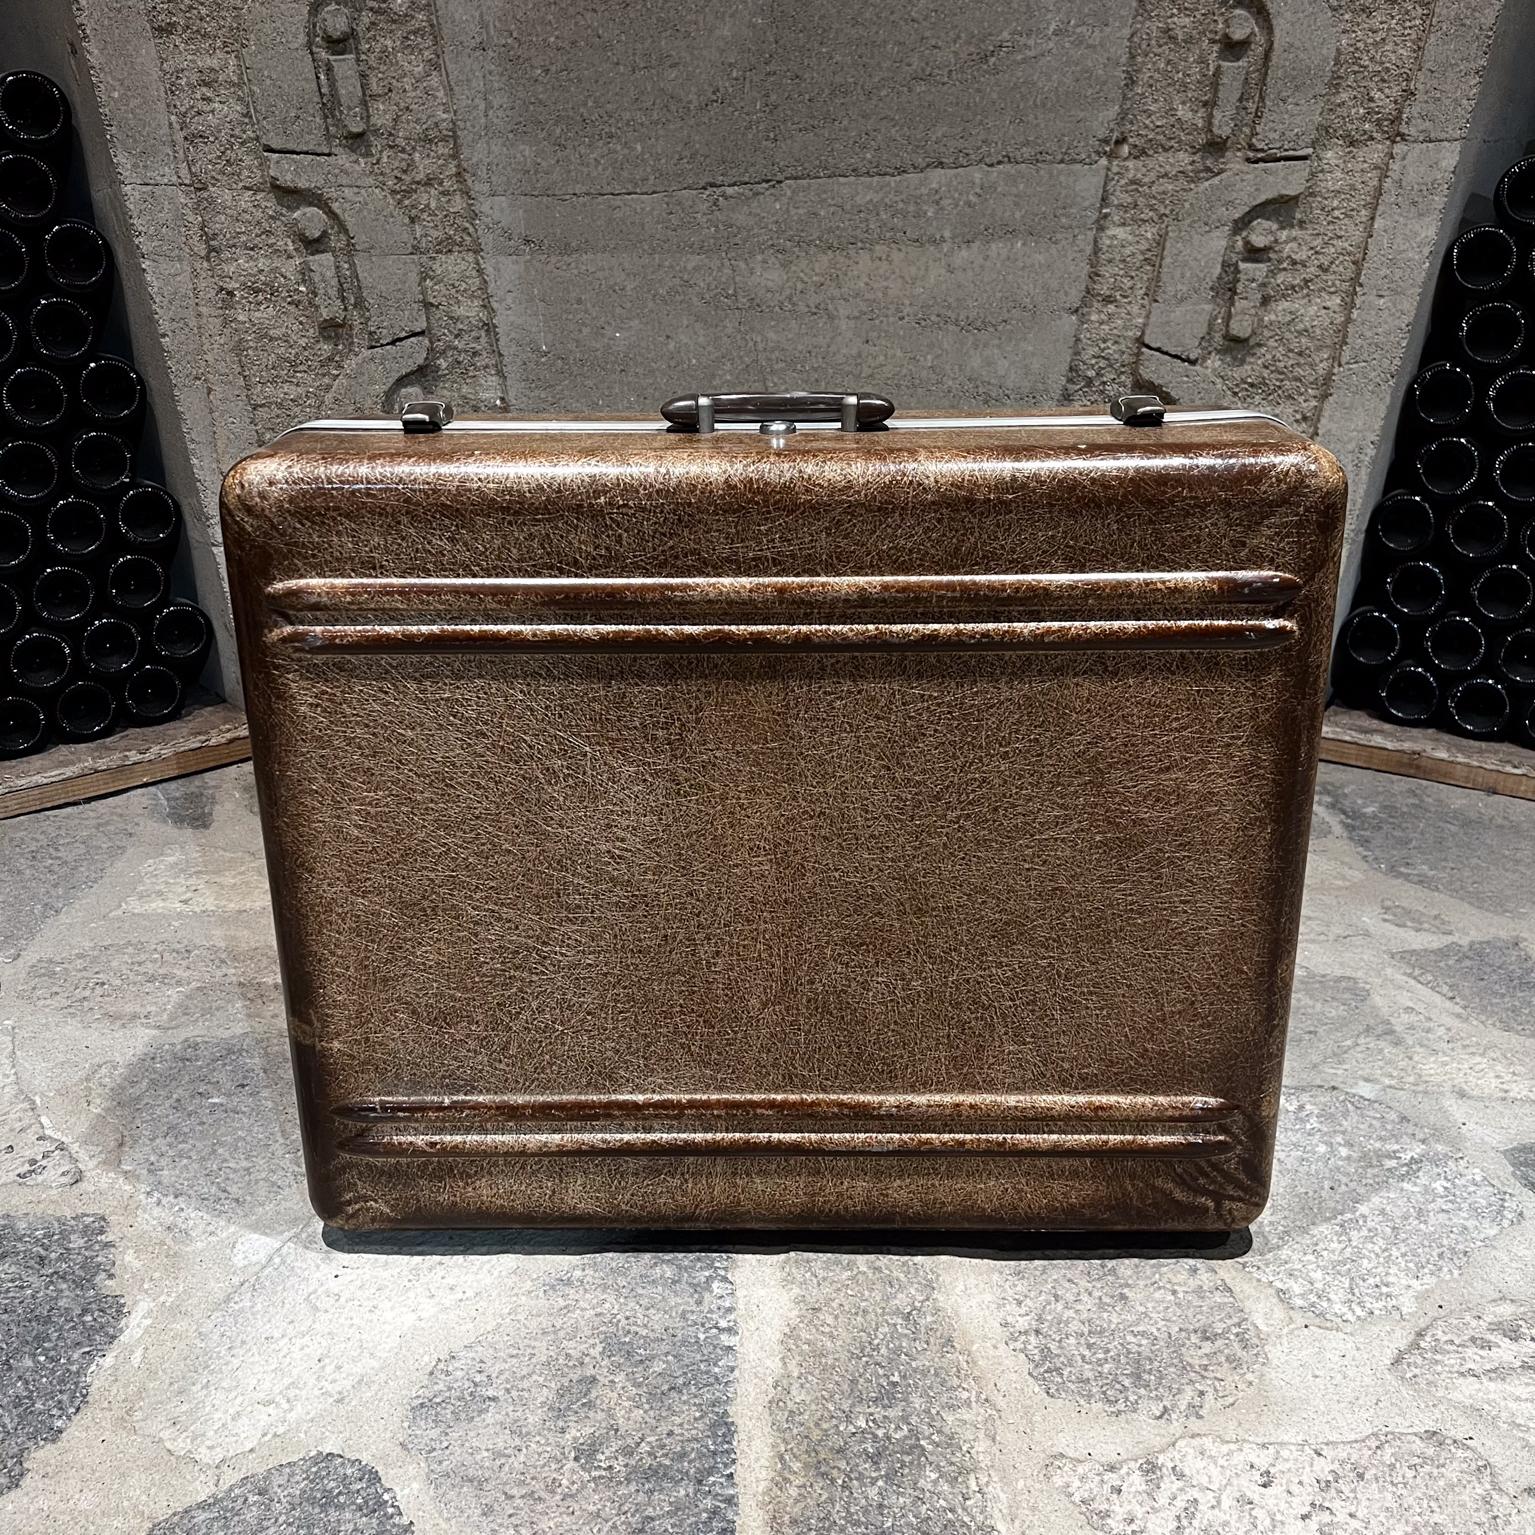 1950s Classic Fiberglass Luggage Brown Suitcase Hardshell
maker Koch of California
20.5 tall x 24.5 w x 8.5 d
Preowned vintage unrestored used condition
See all images provided.
